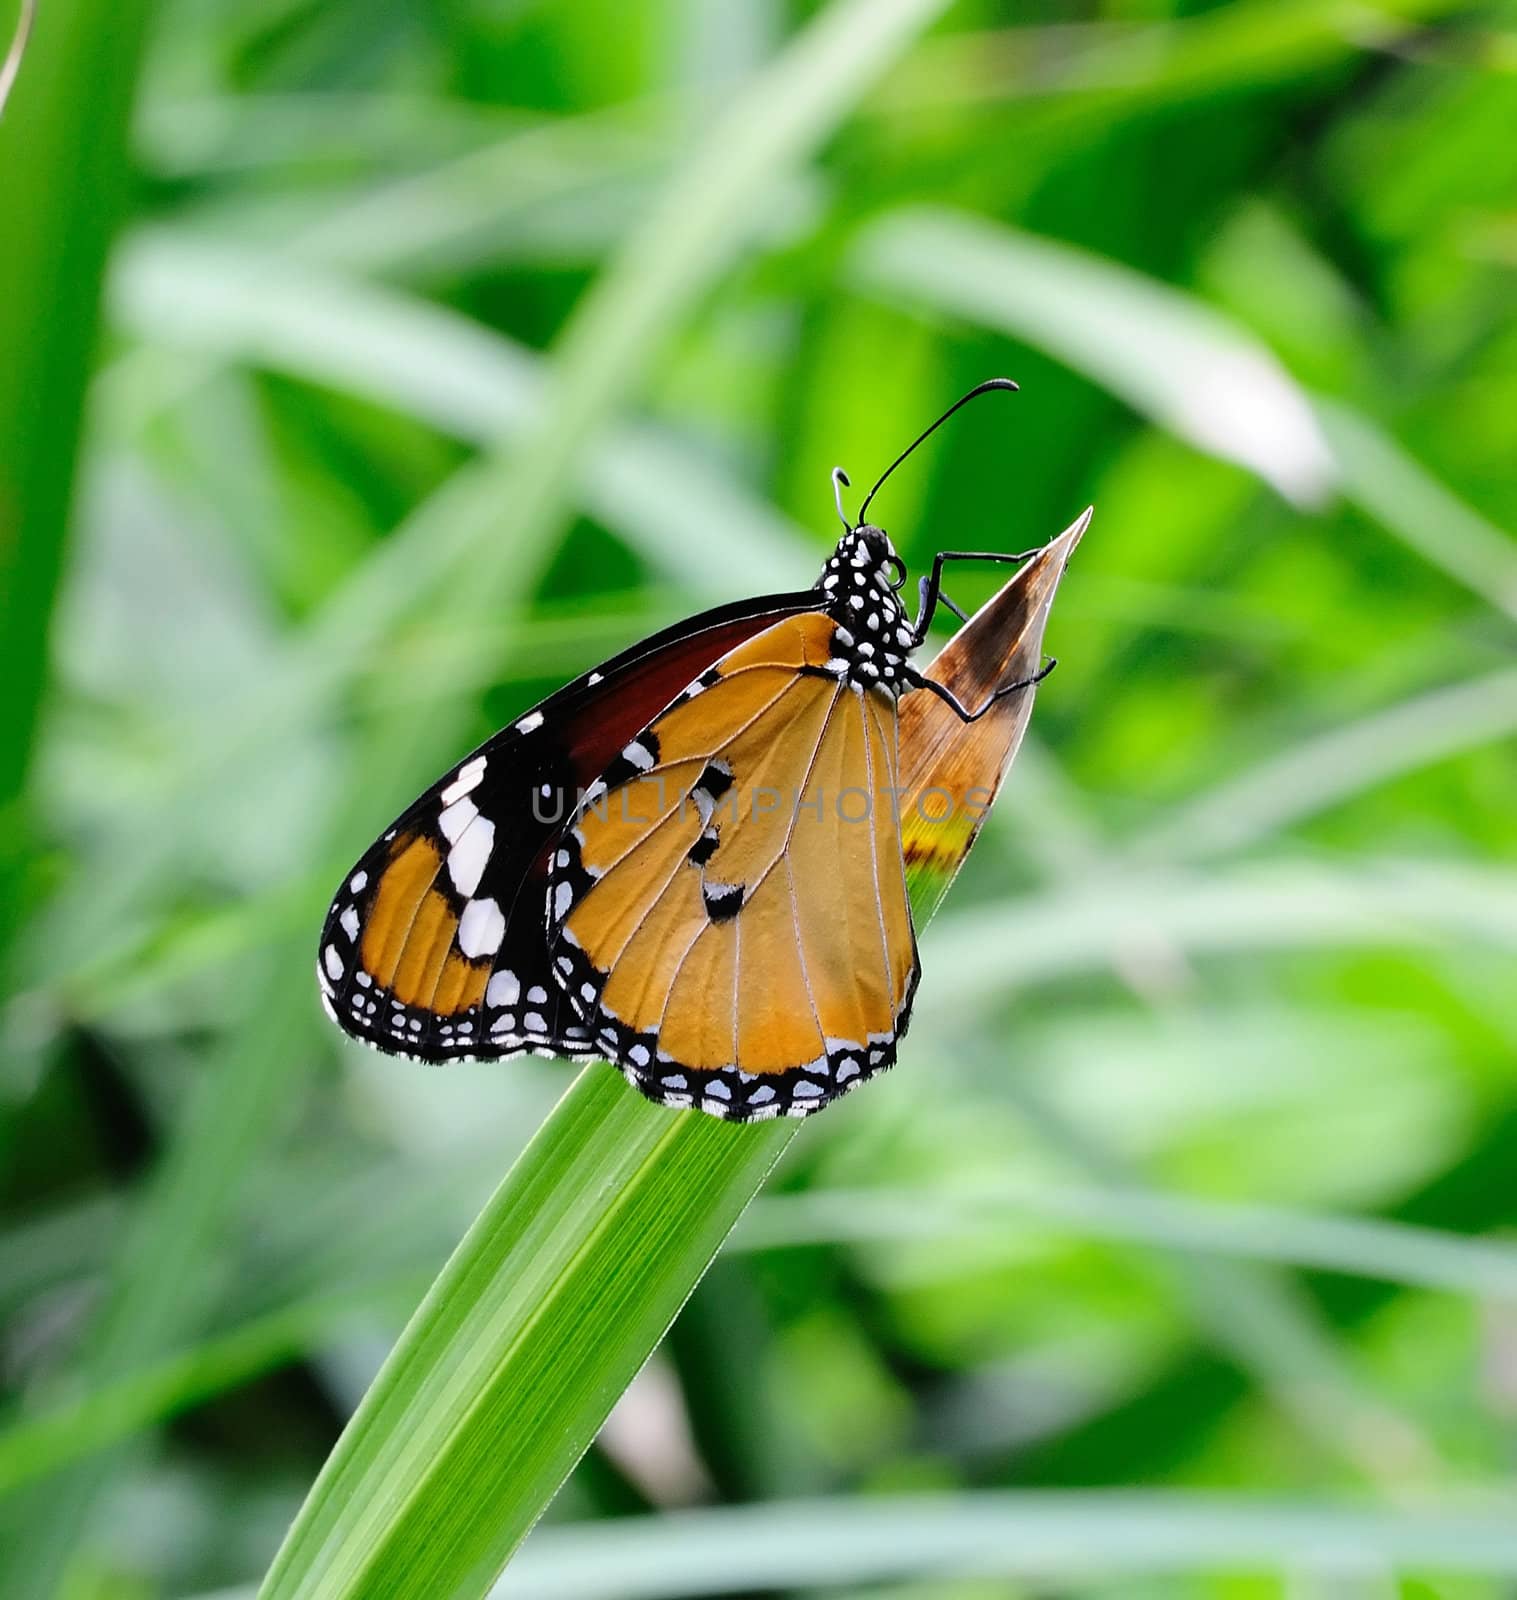 Close-up of a pretty butterfly sitting on the edge of a leaf